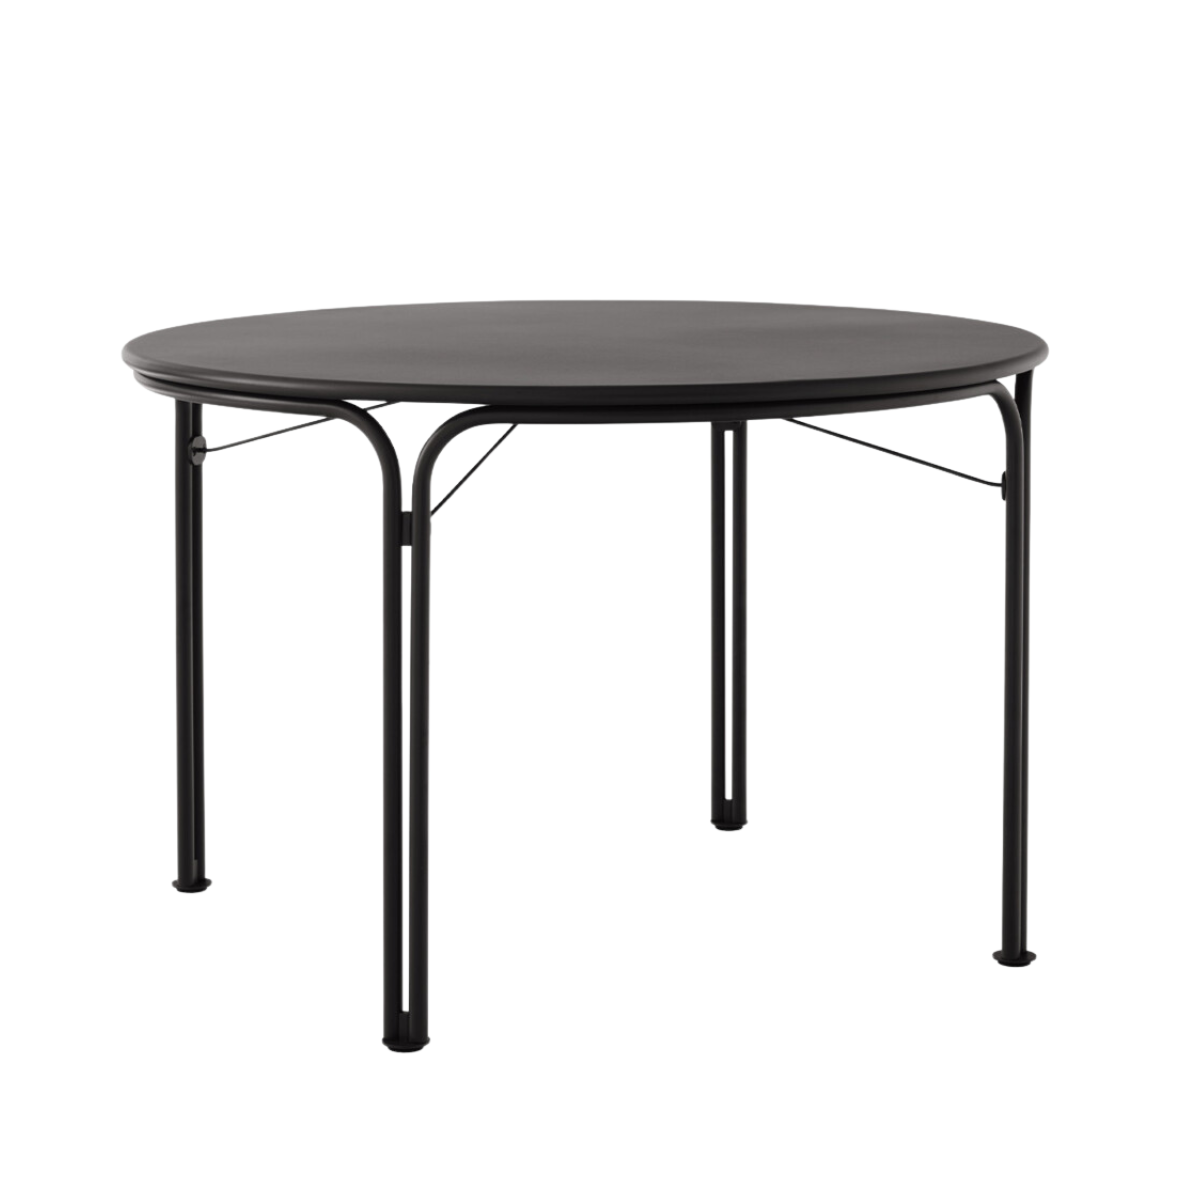 &Tradition | Thorvald Outdoor Dining Table SC98